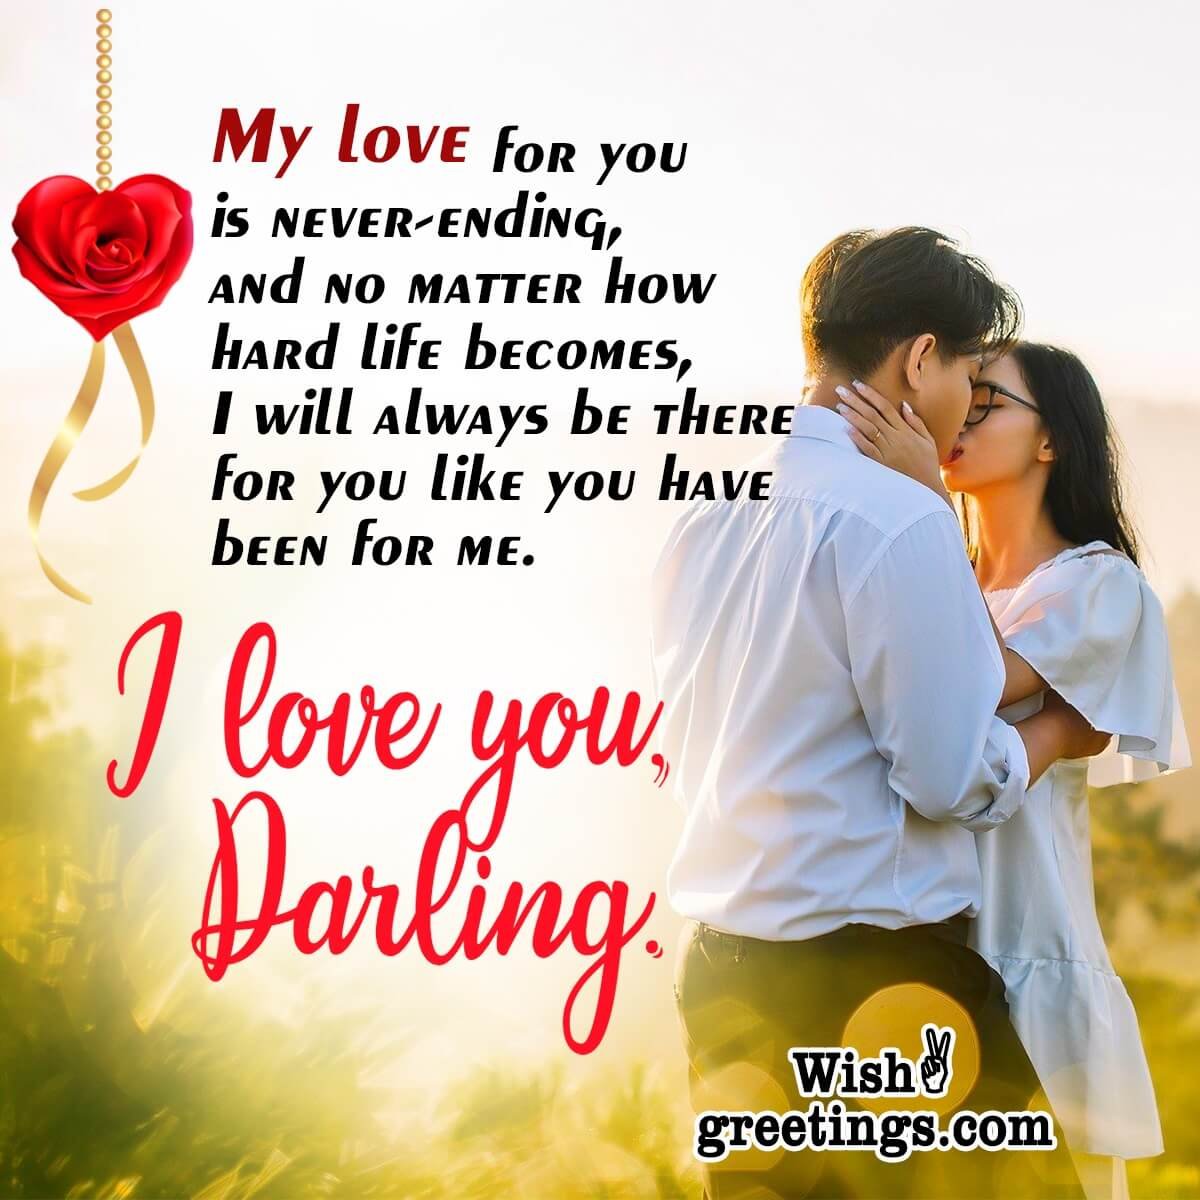 Romantic Love Messages - Wish Greetings